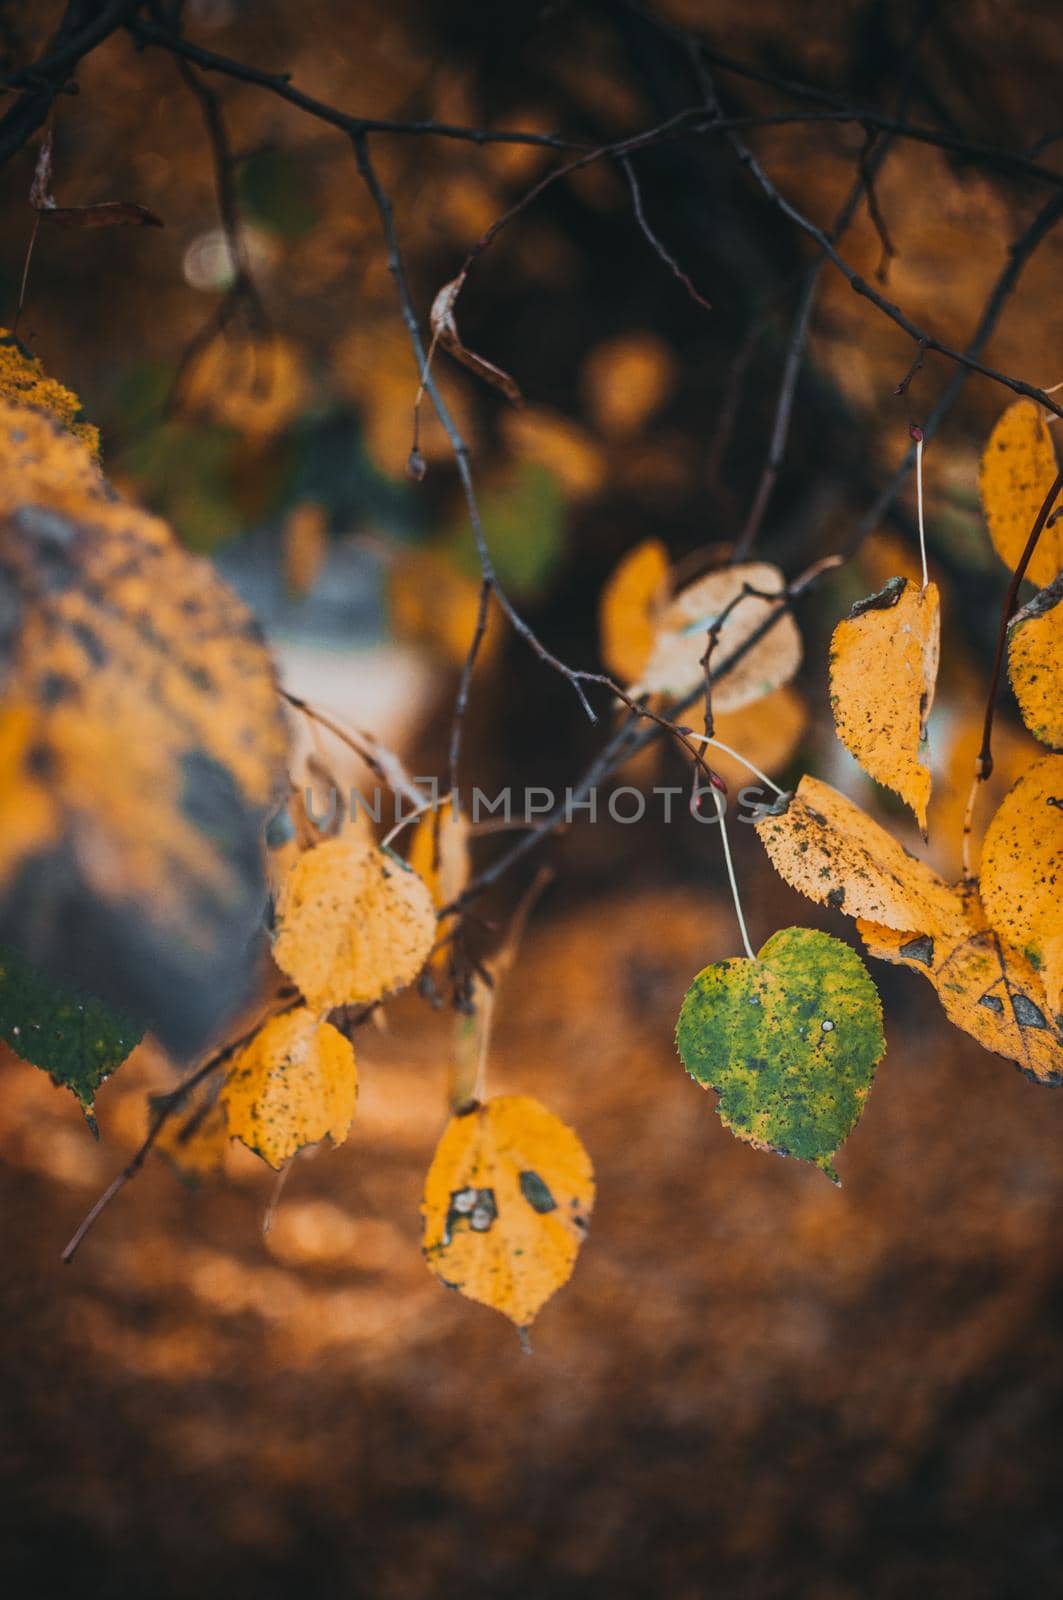 beautiful autumn leaves of yellow birch closeup. Autumn landscape background. Autumn abstract background with golden birch. Autumn nature forest background for design.